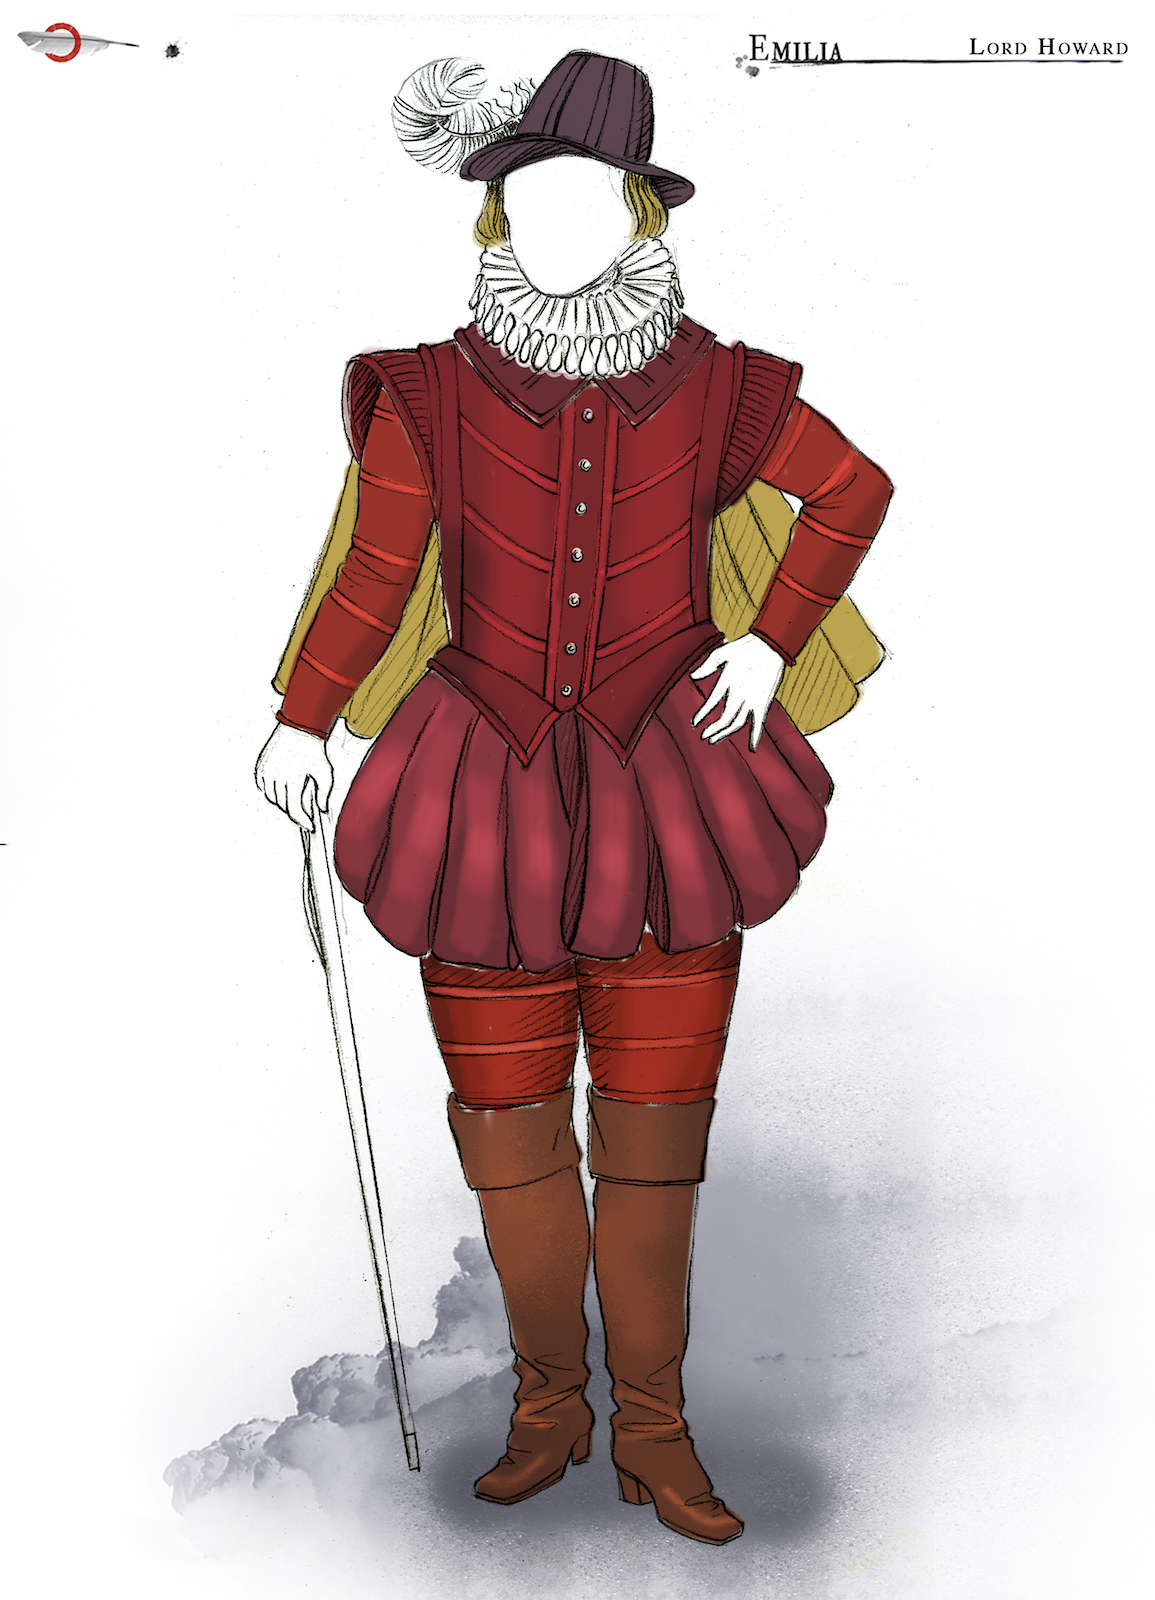 A costume sketch of red male Elizabethan outfit